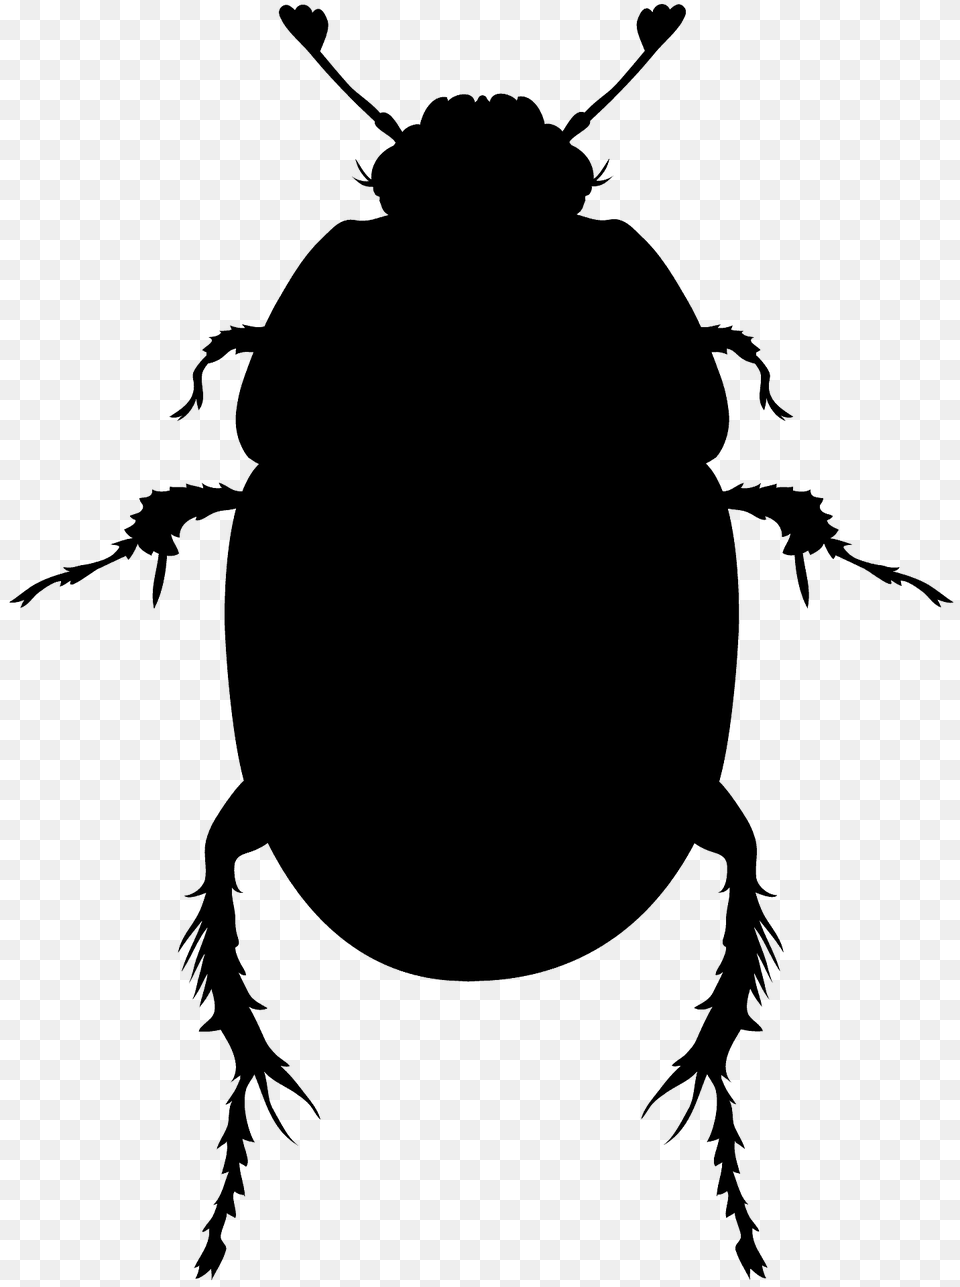 Scarab Beetle Silhouette, Animal, Dung Beetle, Insect, Invertebrate Png